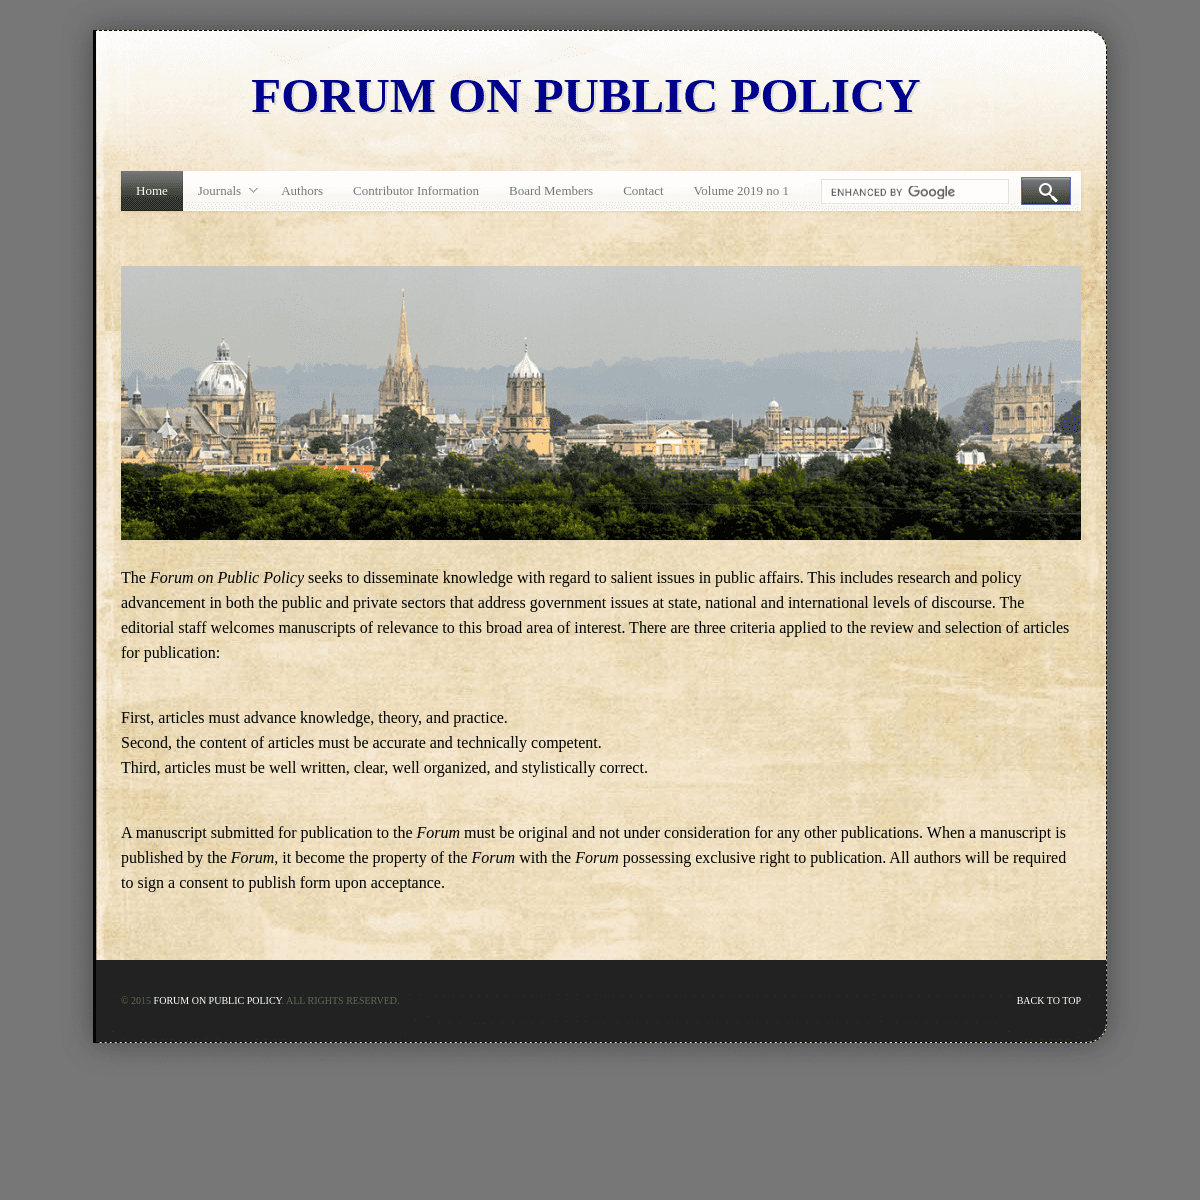 A complete backup of https://forumonpublicpolicy.com